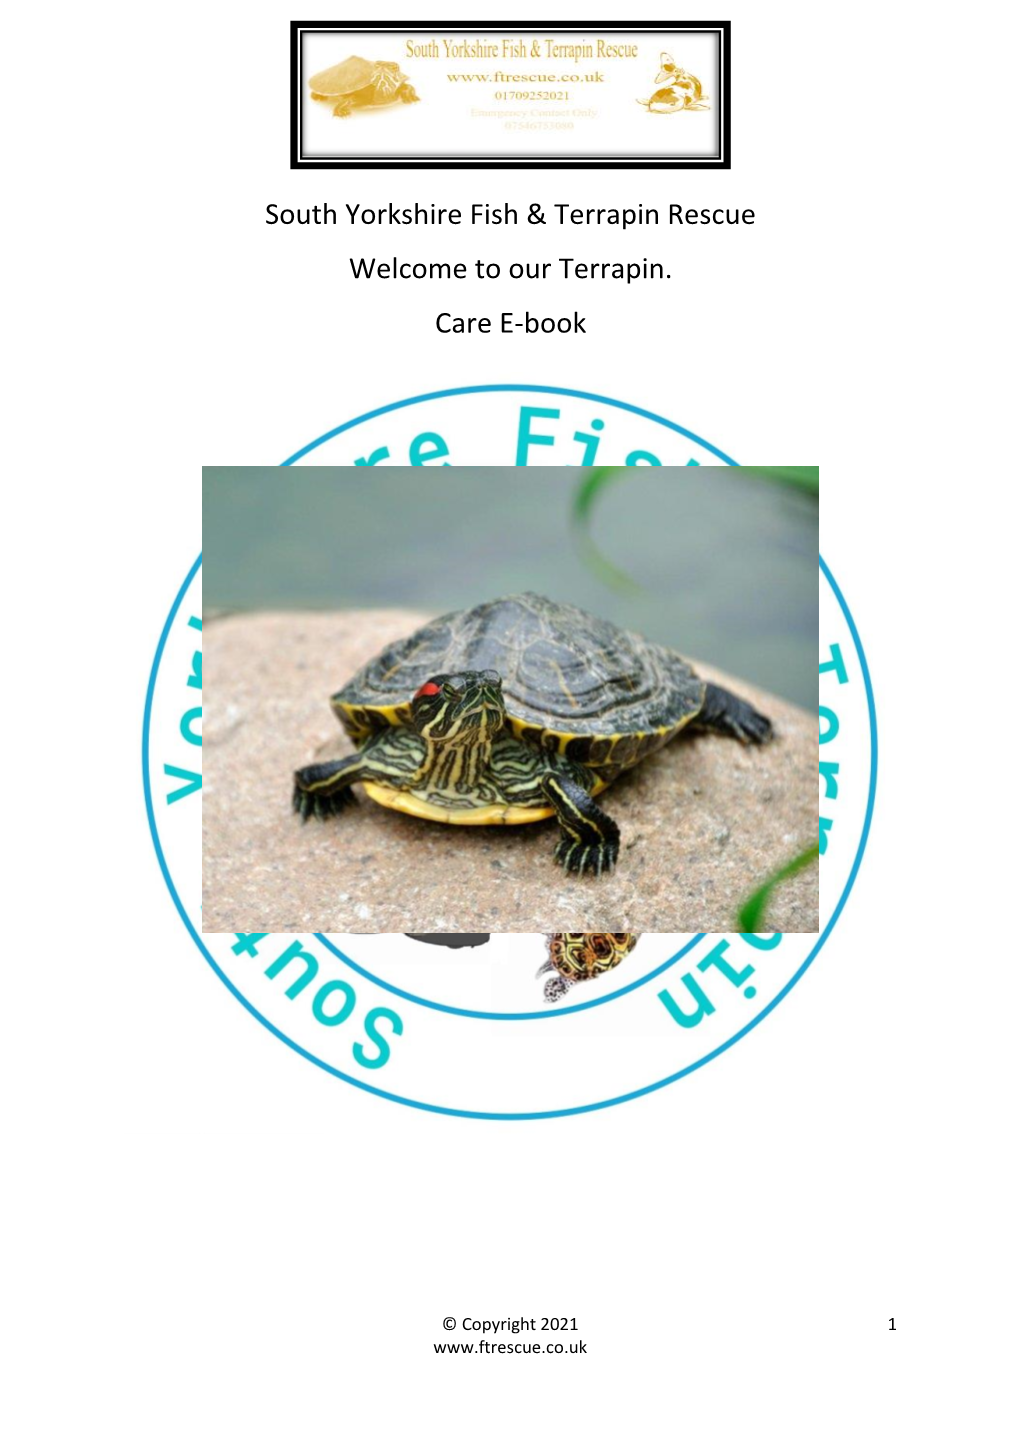 South Yorkshire Fish & Terrapin Rescue Welcome to Our Terrapin